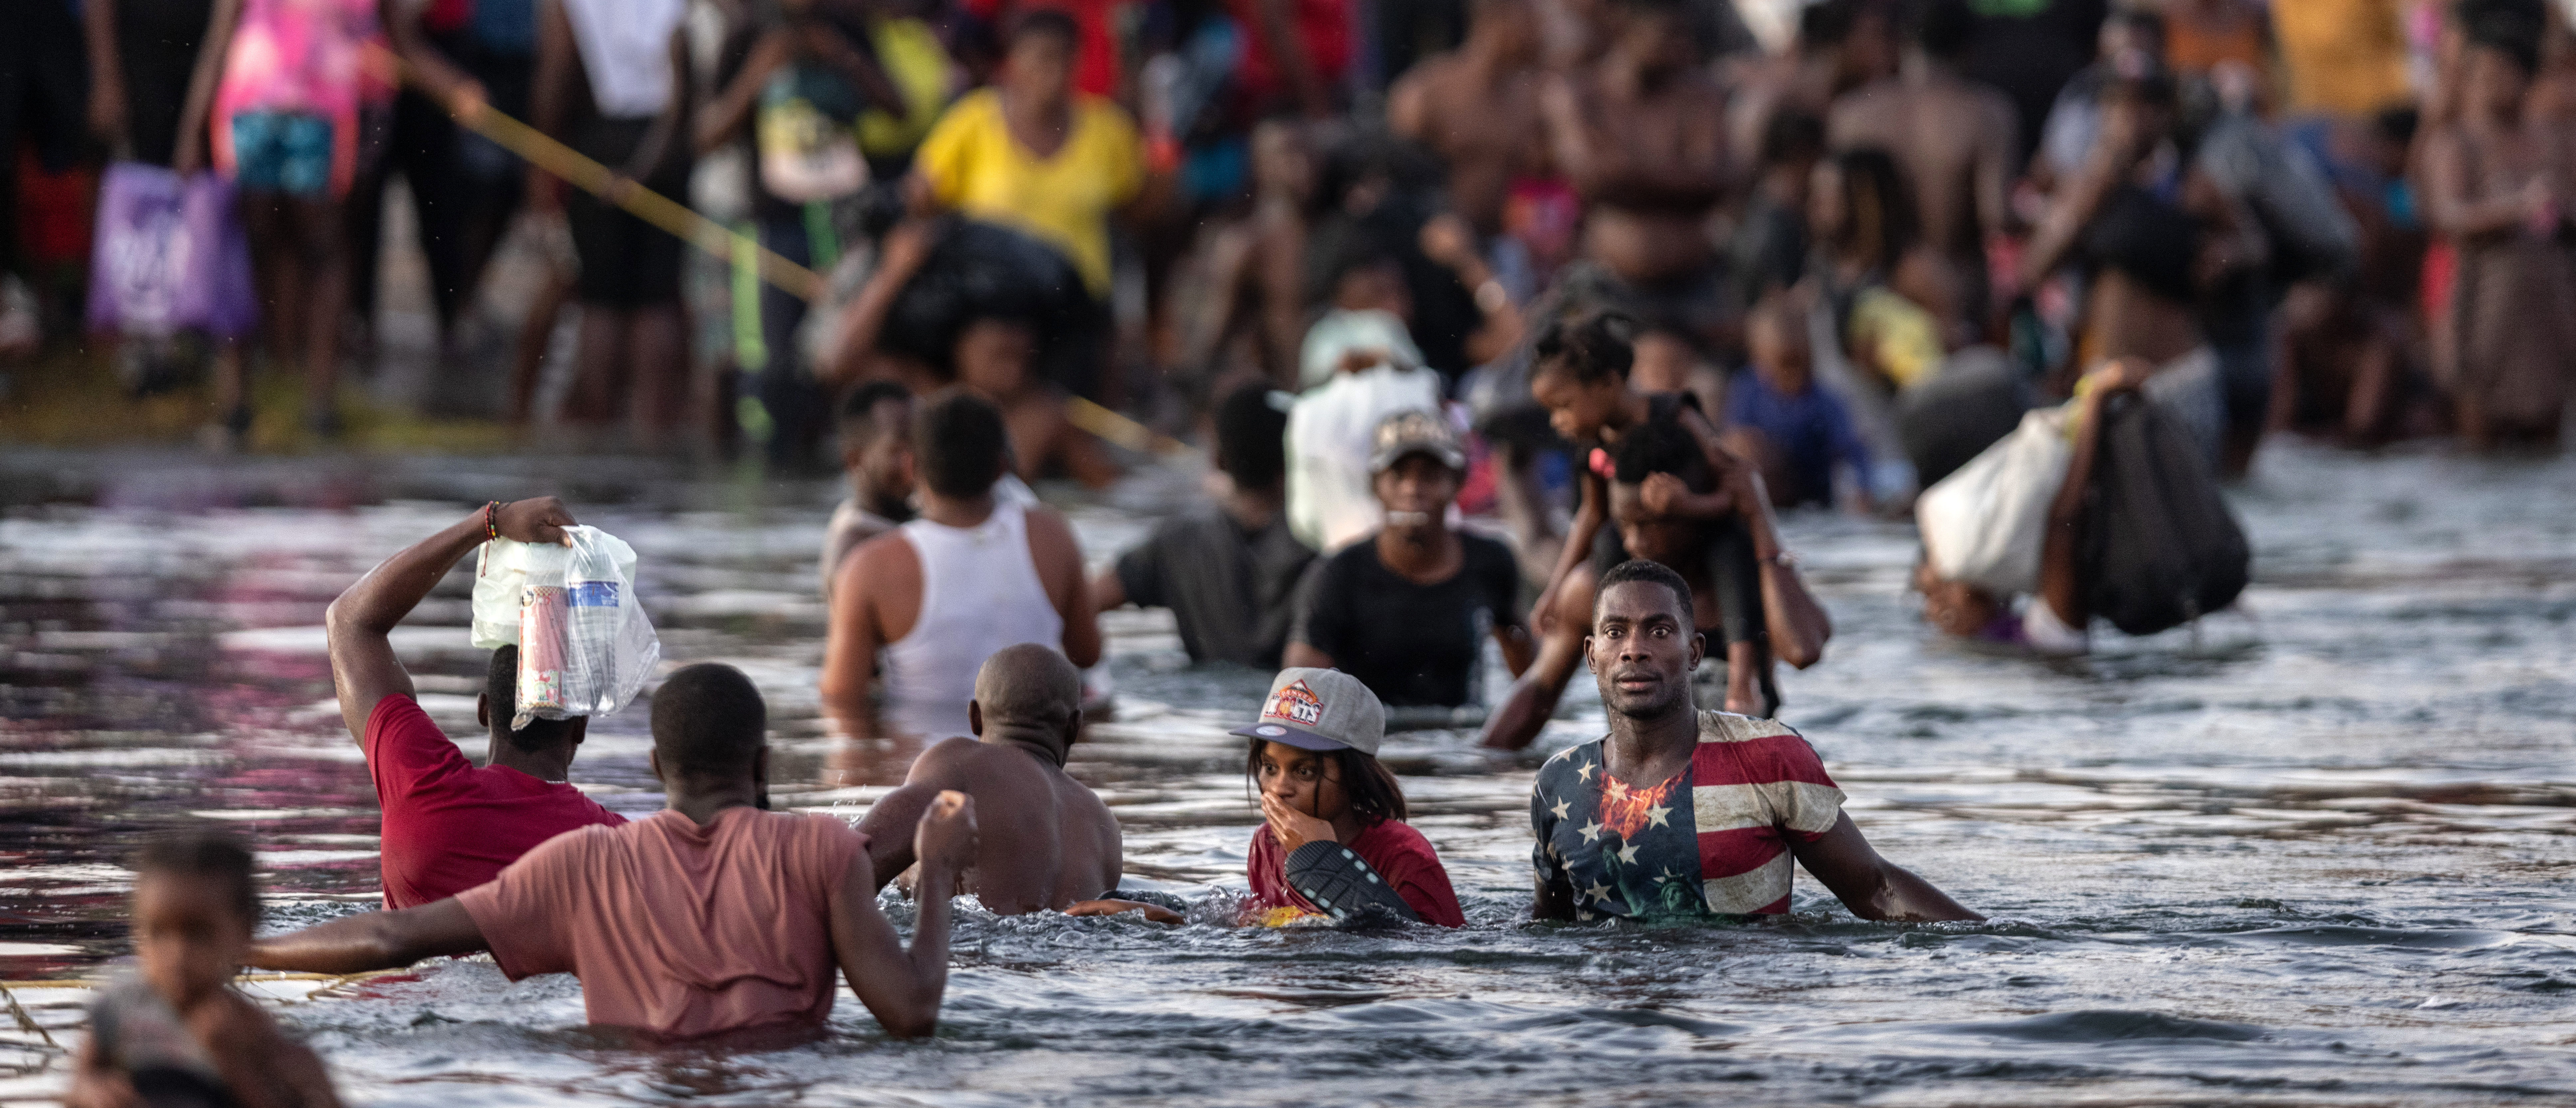 CIUDAD ACUNA, TEXAS - SEPTEMBER 19: Immigrants, mostly from Haiti gather on the bank of the Rio Grande on September 19, 2021 in Ciudad Acuna, Mexico, across the border from Del Rio, Texas. As U.S. immigration authorities began deporting immigrants back to Haiti from Del Rio, thousands more waited in a camp under an international bridge in Del Rio and others crossed the river back into Mexico. (Photo by John Moore/Getty Images)